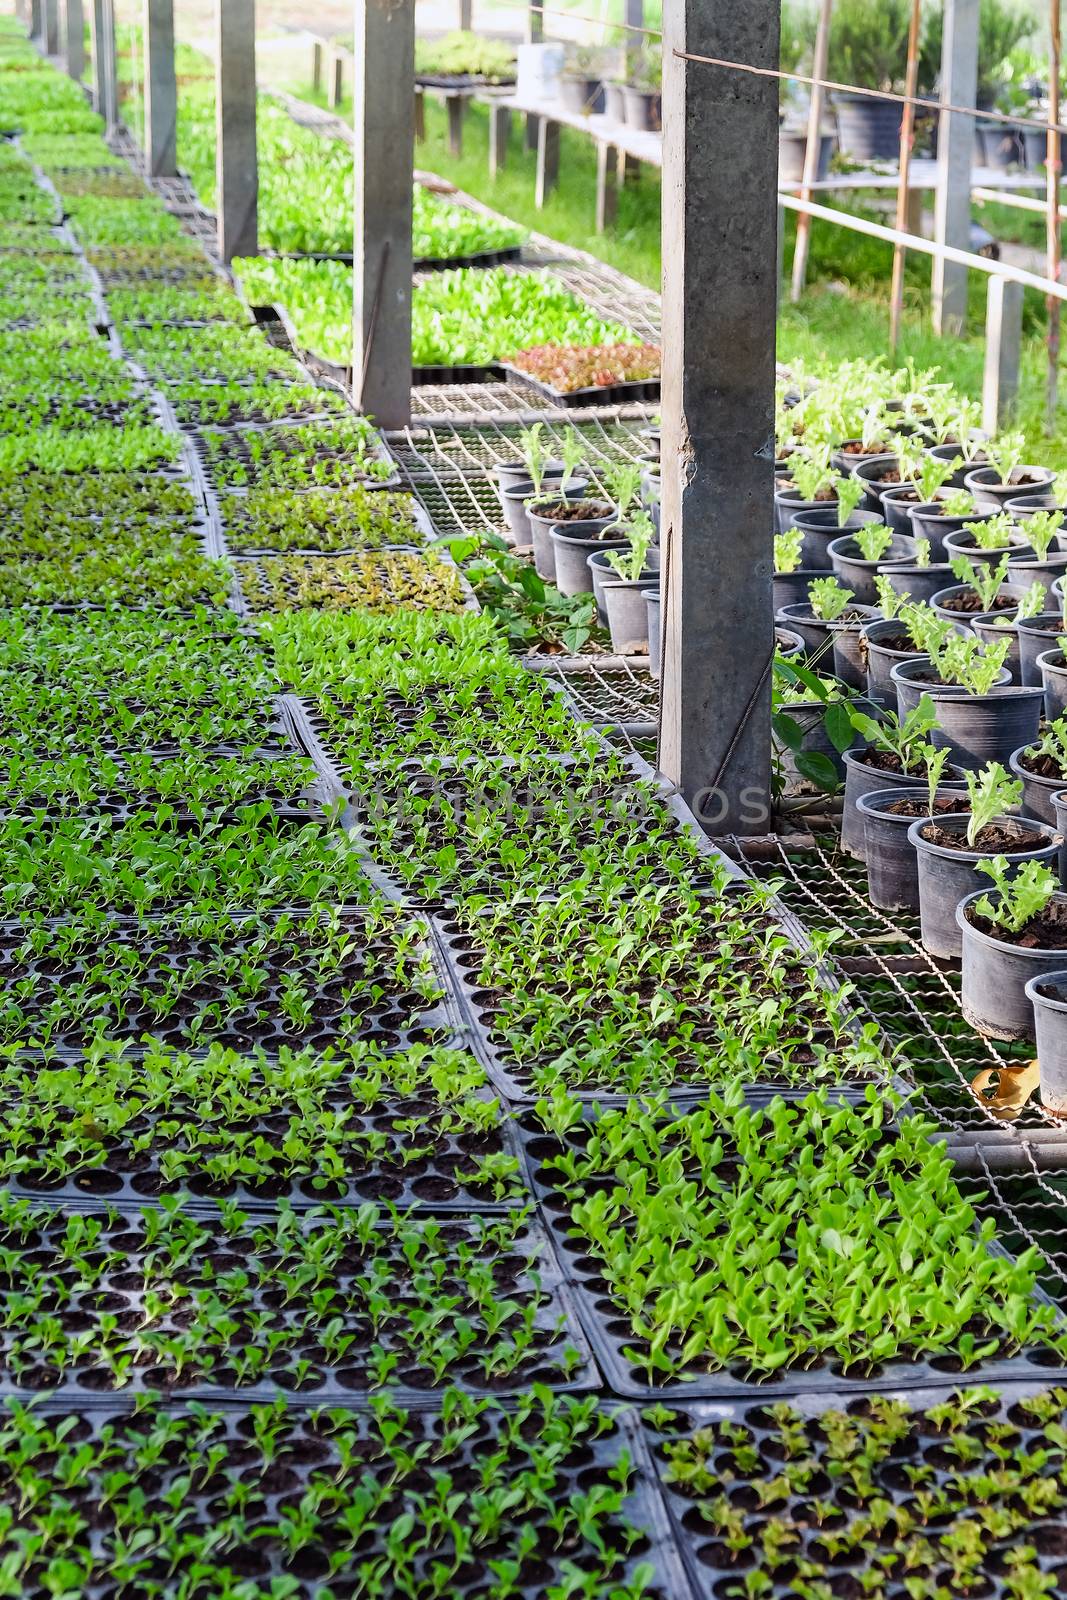 Image of young plants growing in a greenhouse.